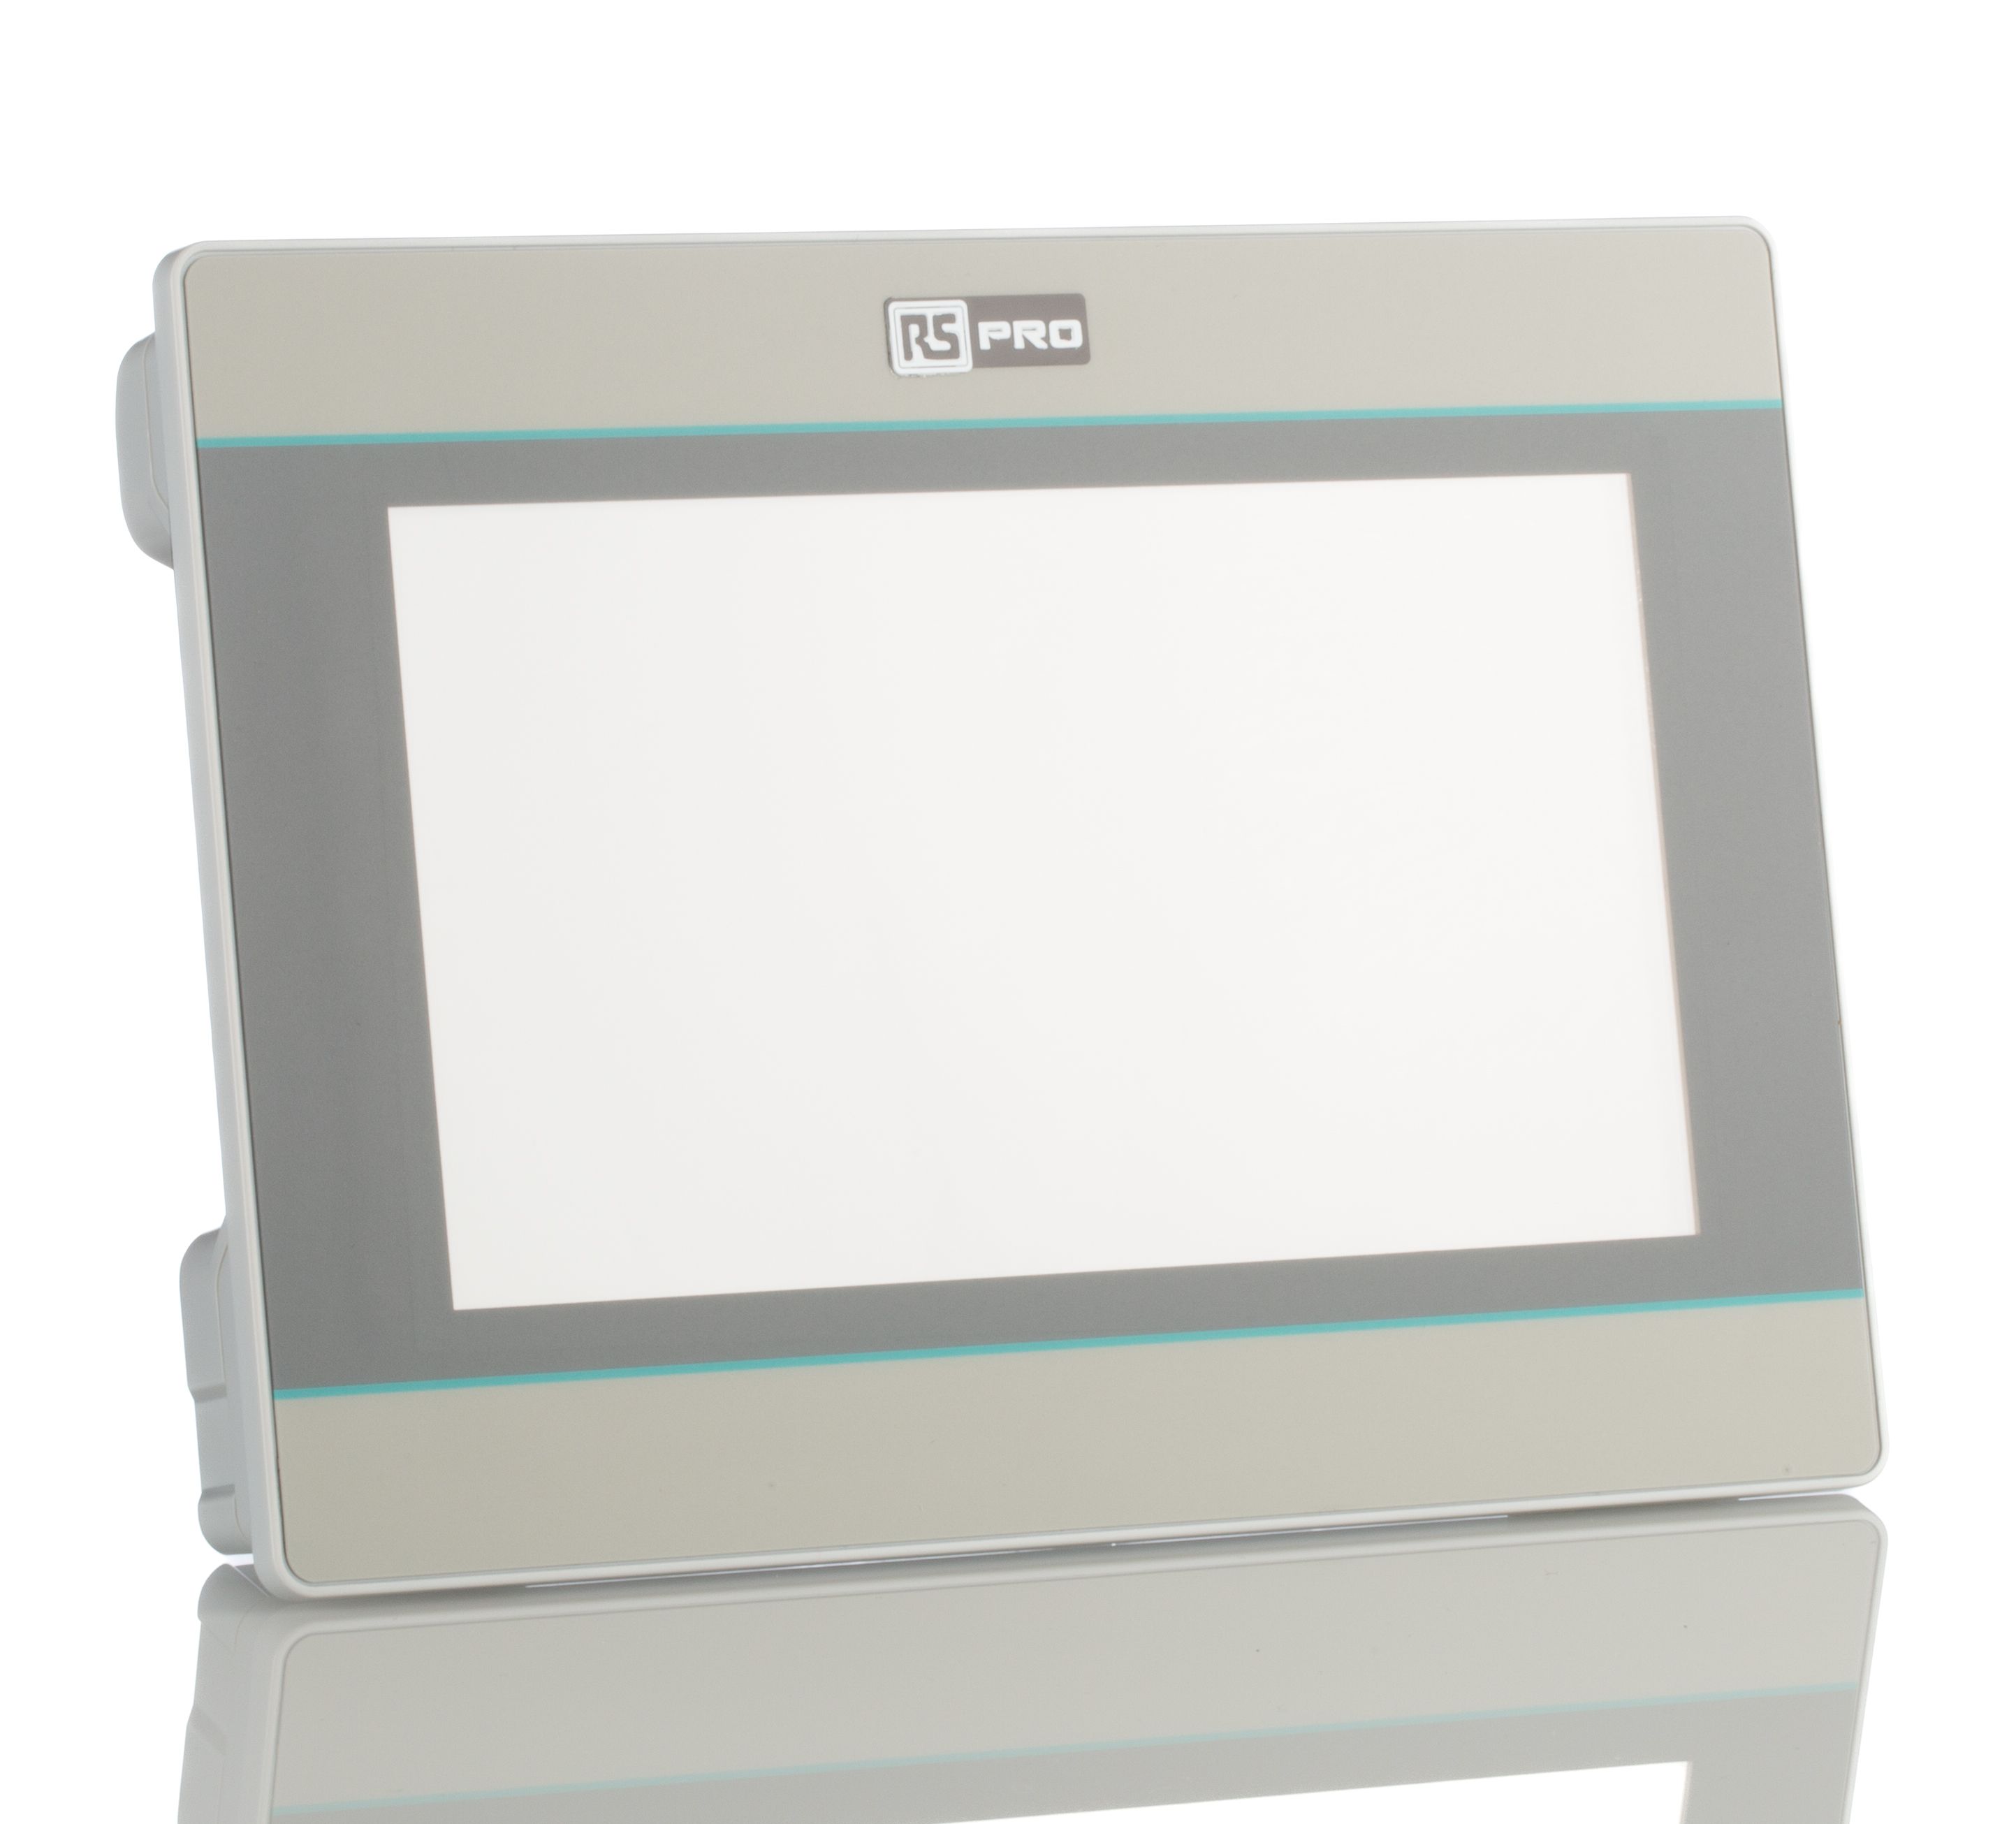 RS PRO 7 tommer TFT LCD Touchscreen, HMI Display Farve, 800 x 480pixels USB, Ethernet, 201 x 147 x 39 mm